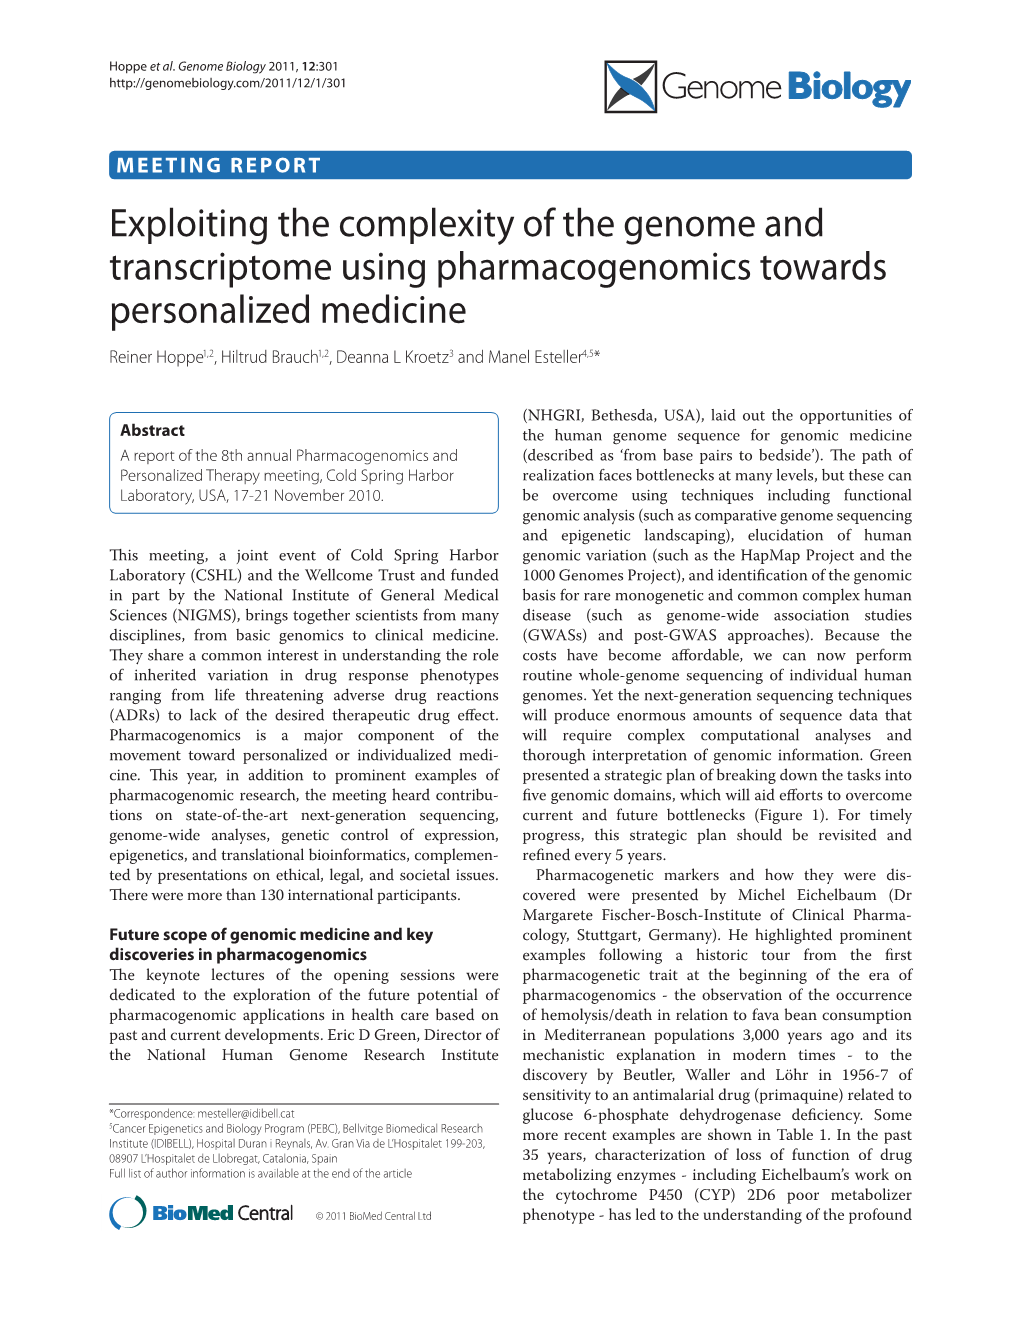 Exploiting the Complexity of the Genome and Transcriptome Using